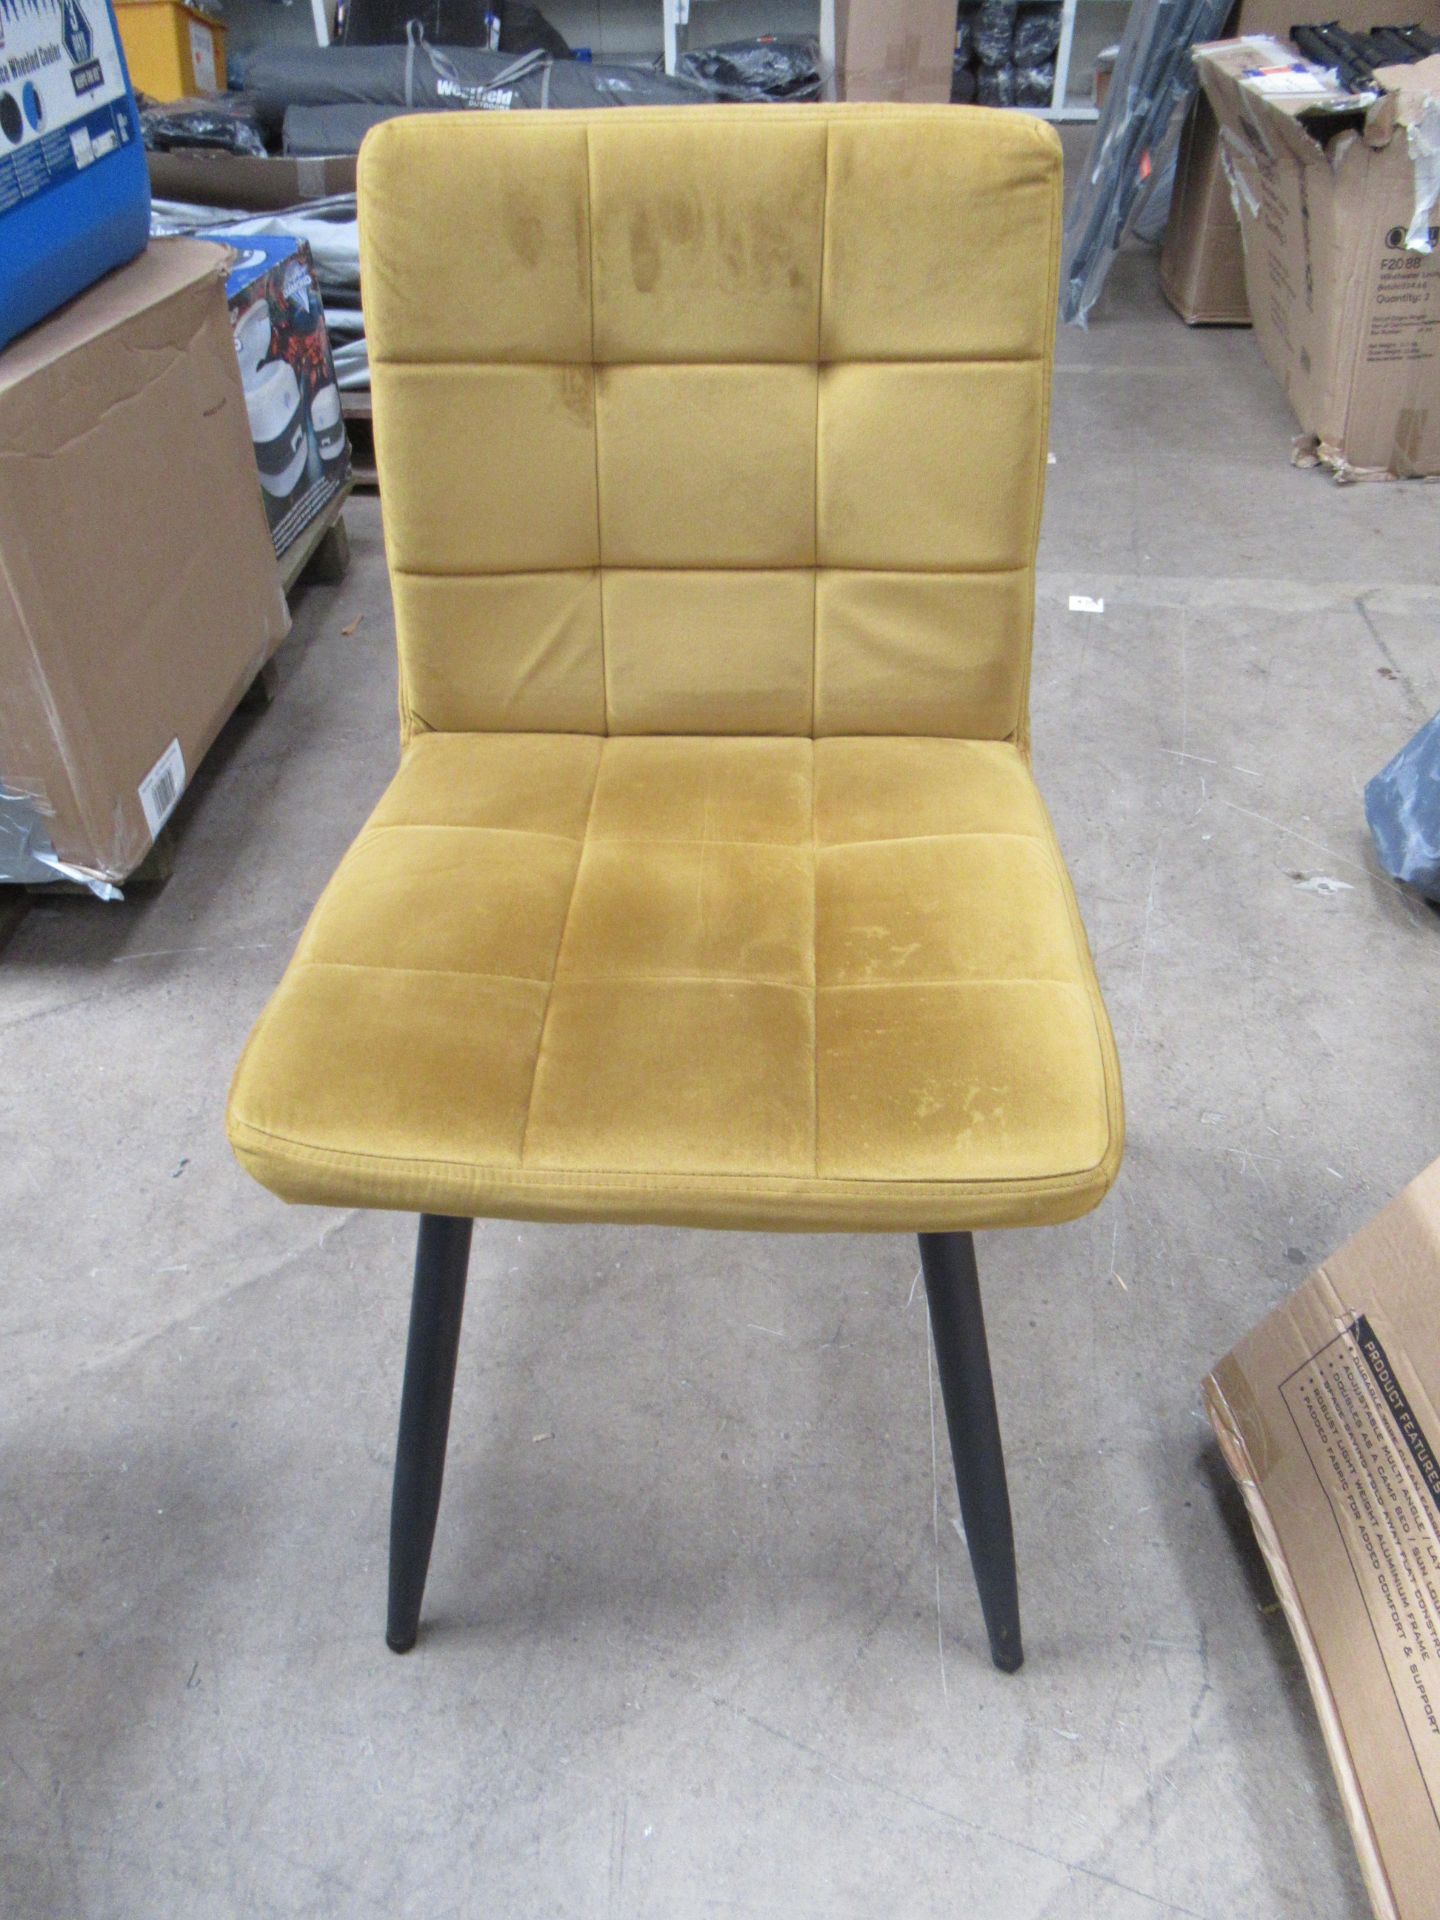 6x Yellow Suede Effect Chairs - Image 2 of 2